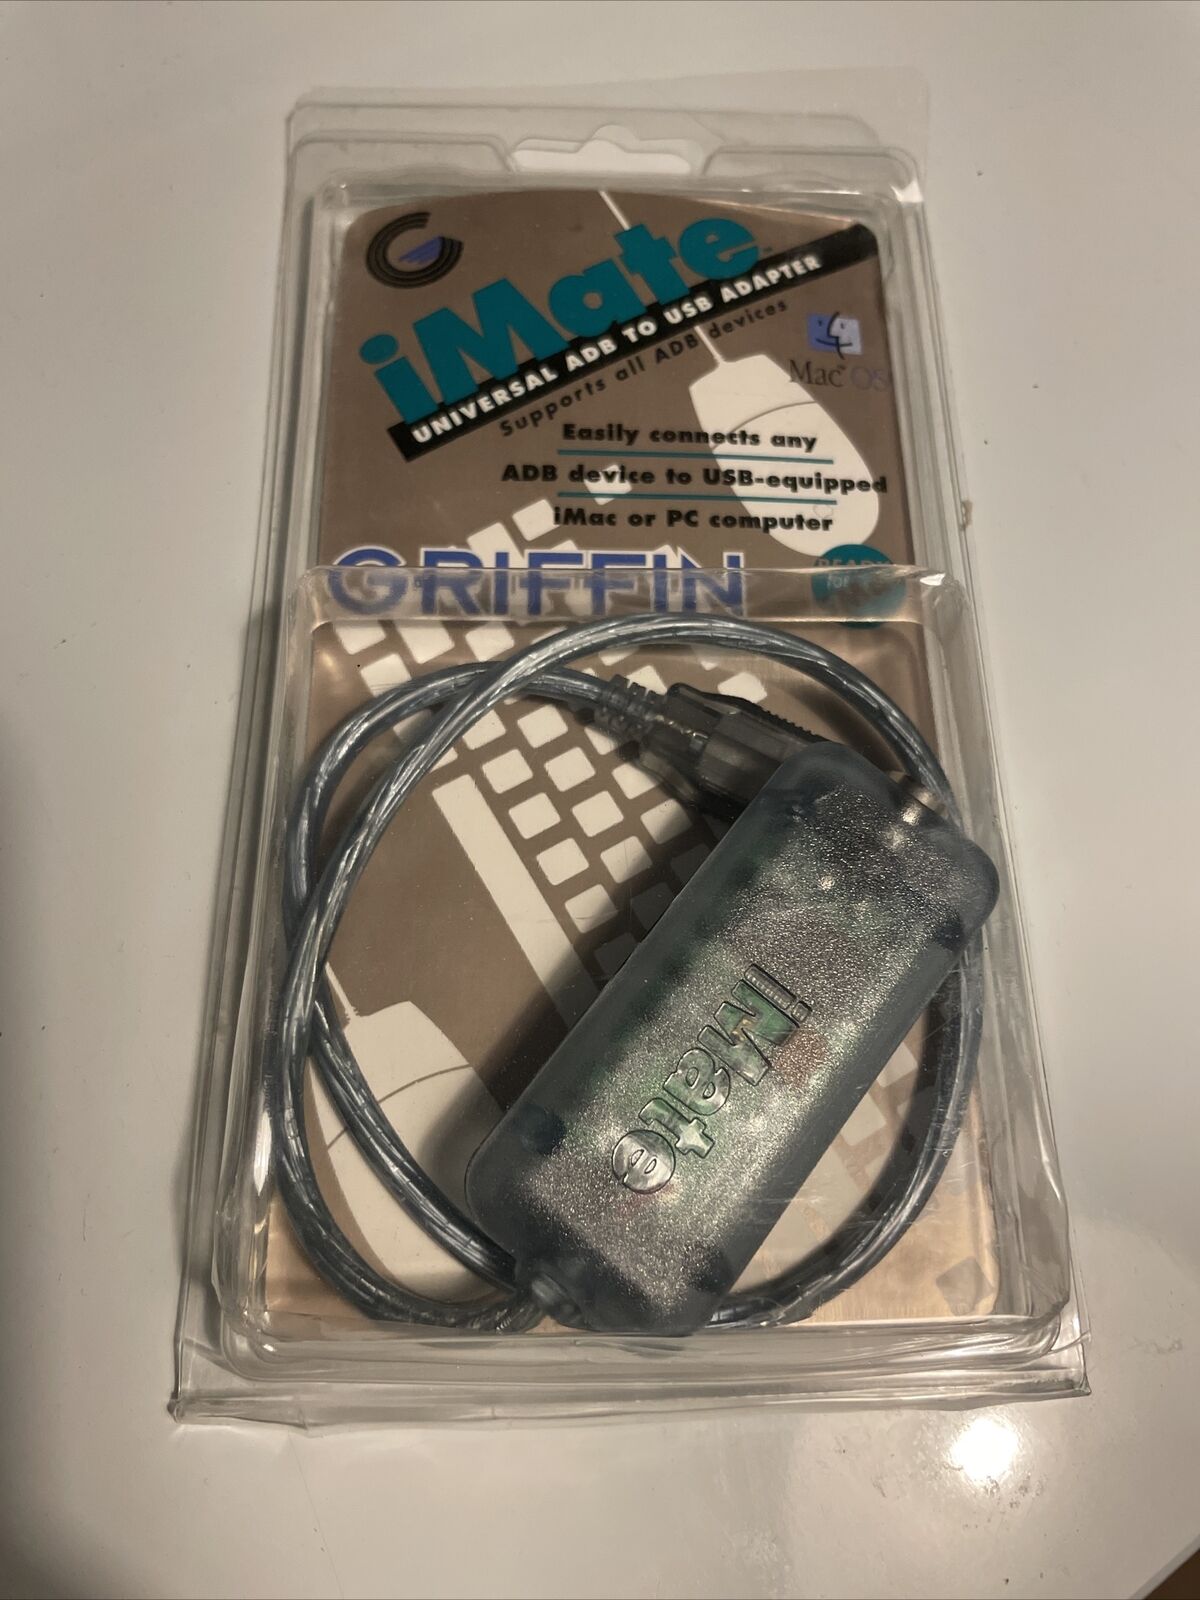 Griffin iMate ADB to USB adapter for Vintage Macintosh ADB Keyboard and/or Mouse